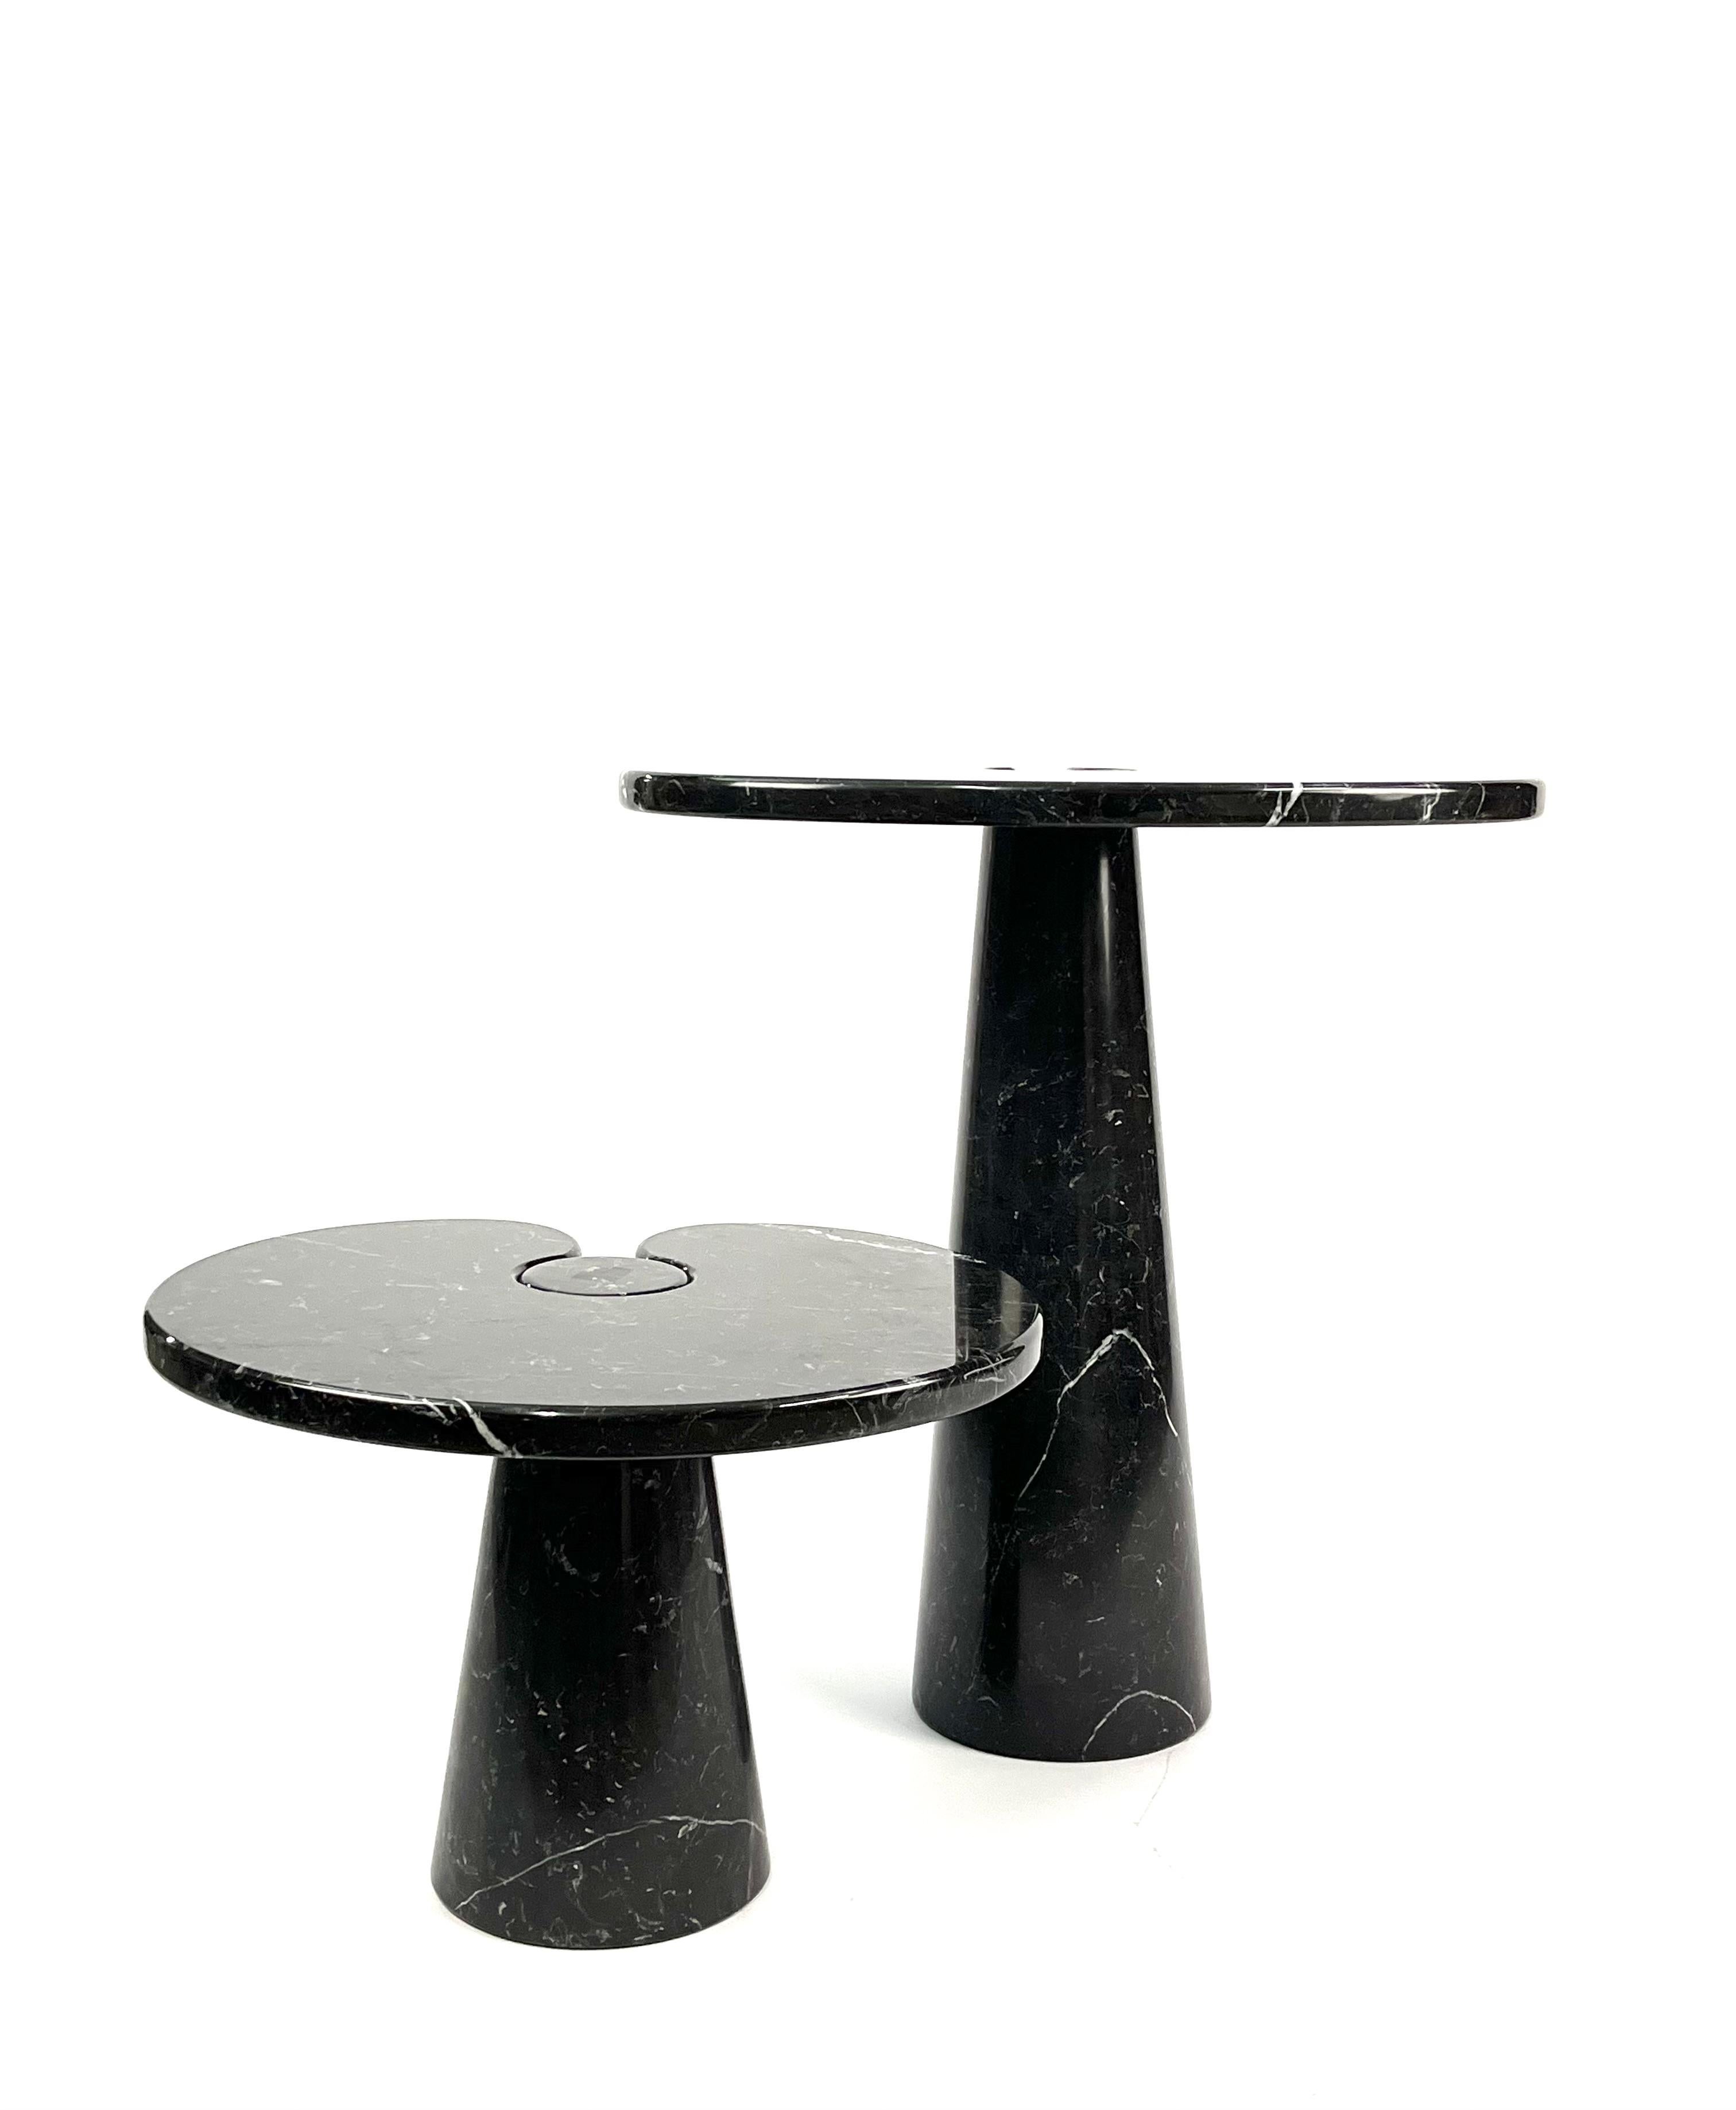 Pair of marble side tables designed by Angelo Mangiarotti. 
The tables belong to the 